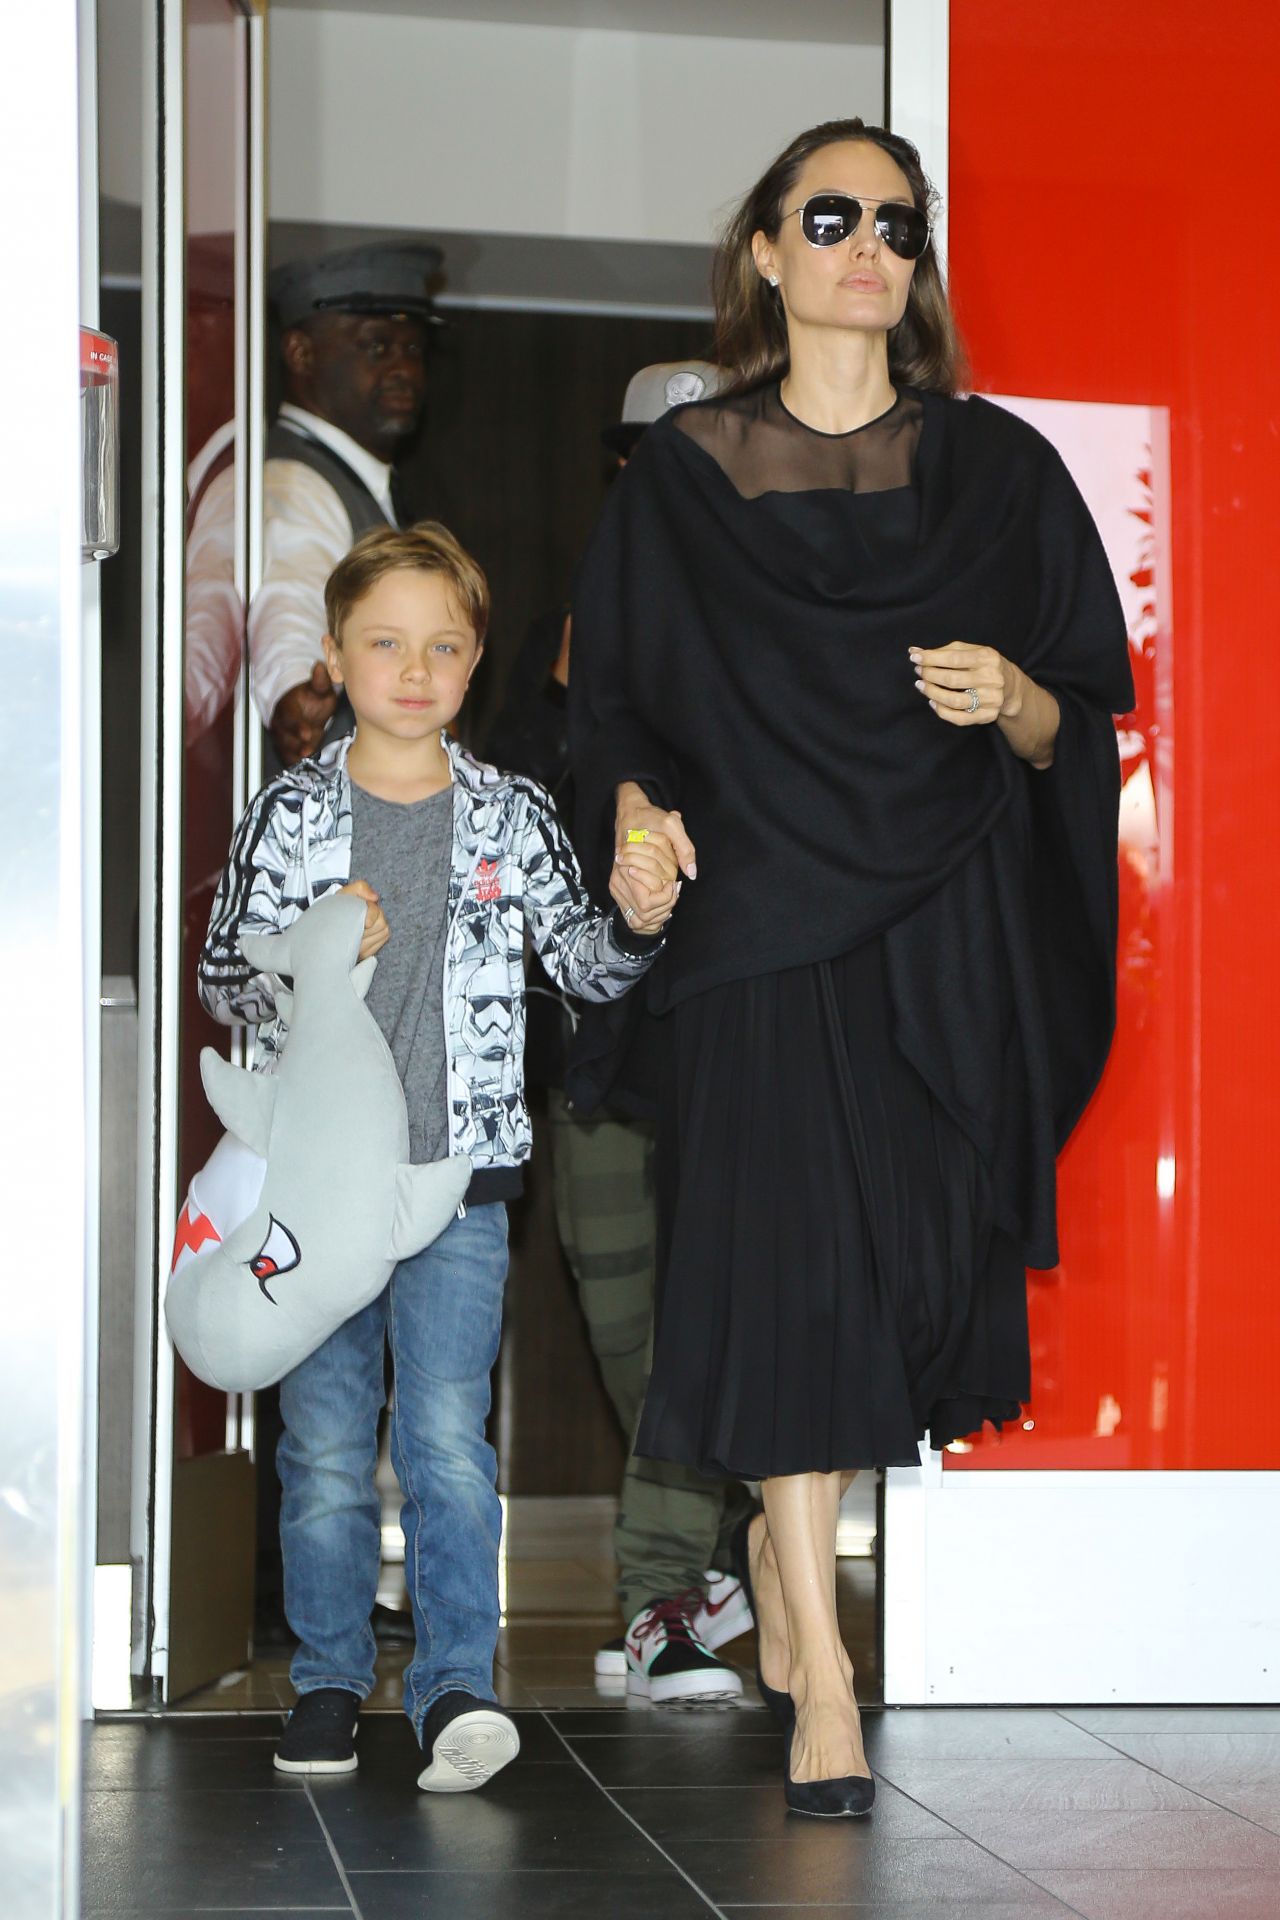 Angelina Jolie LAX Airport May 17, 2016 – Star Style